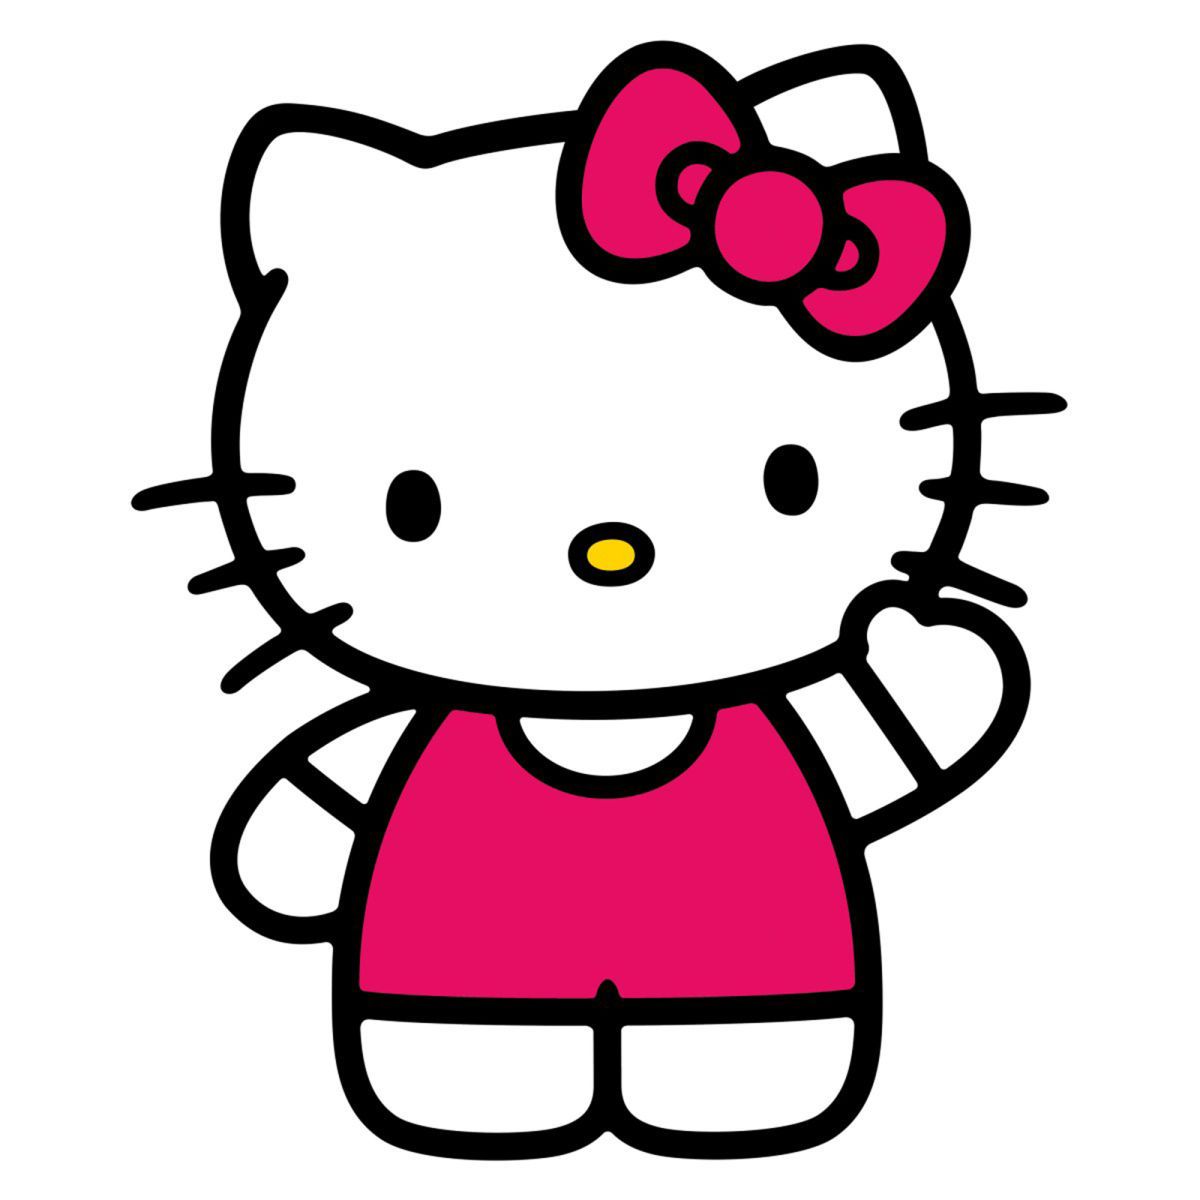 Hello Kitty Movie Coming Out in 2019